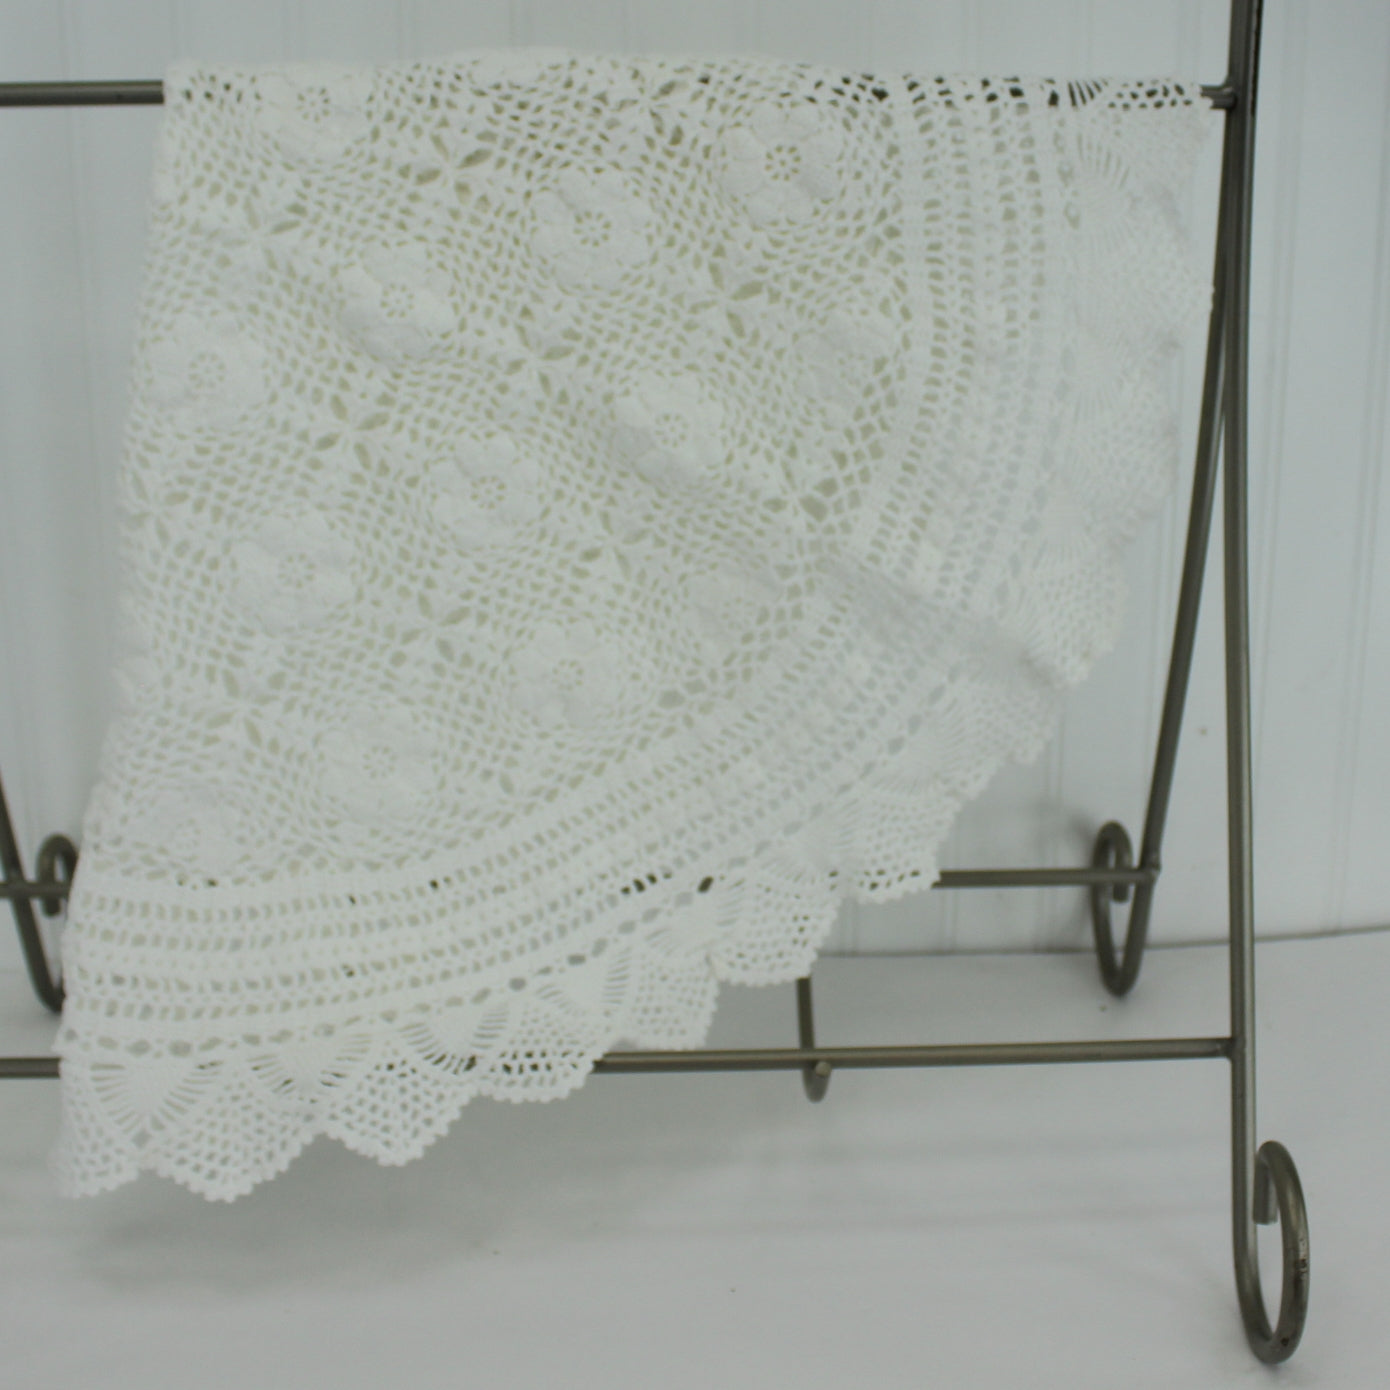 Large Round Crochet Doily Tablecloth White Heavy Cotton 30" Diameter well crafted